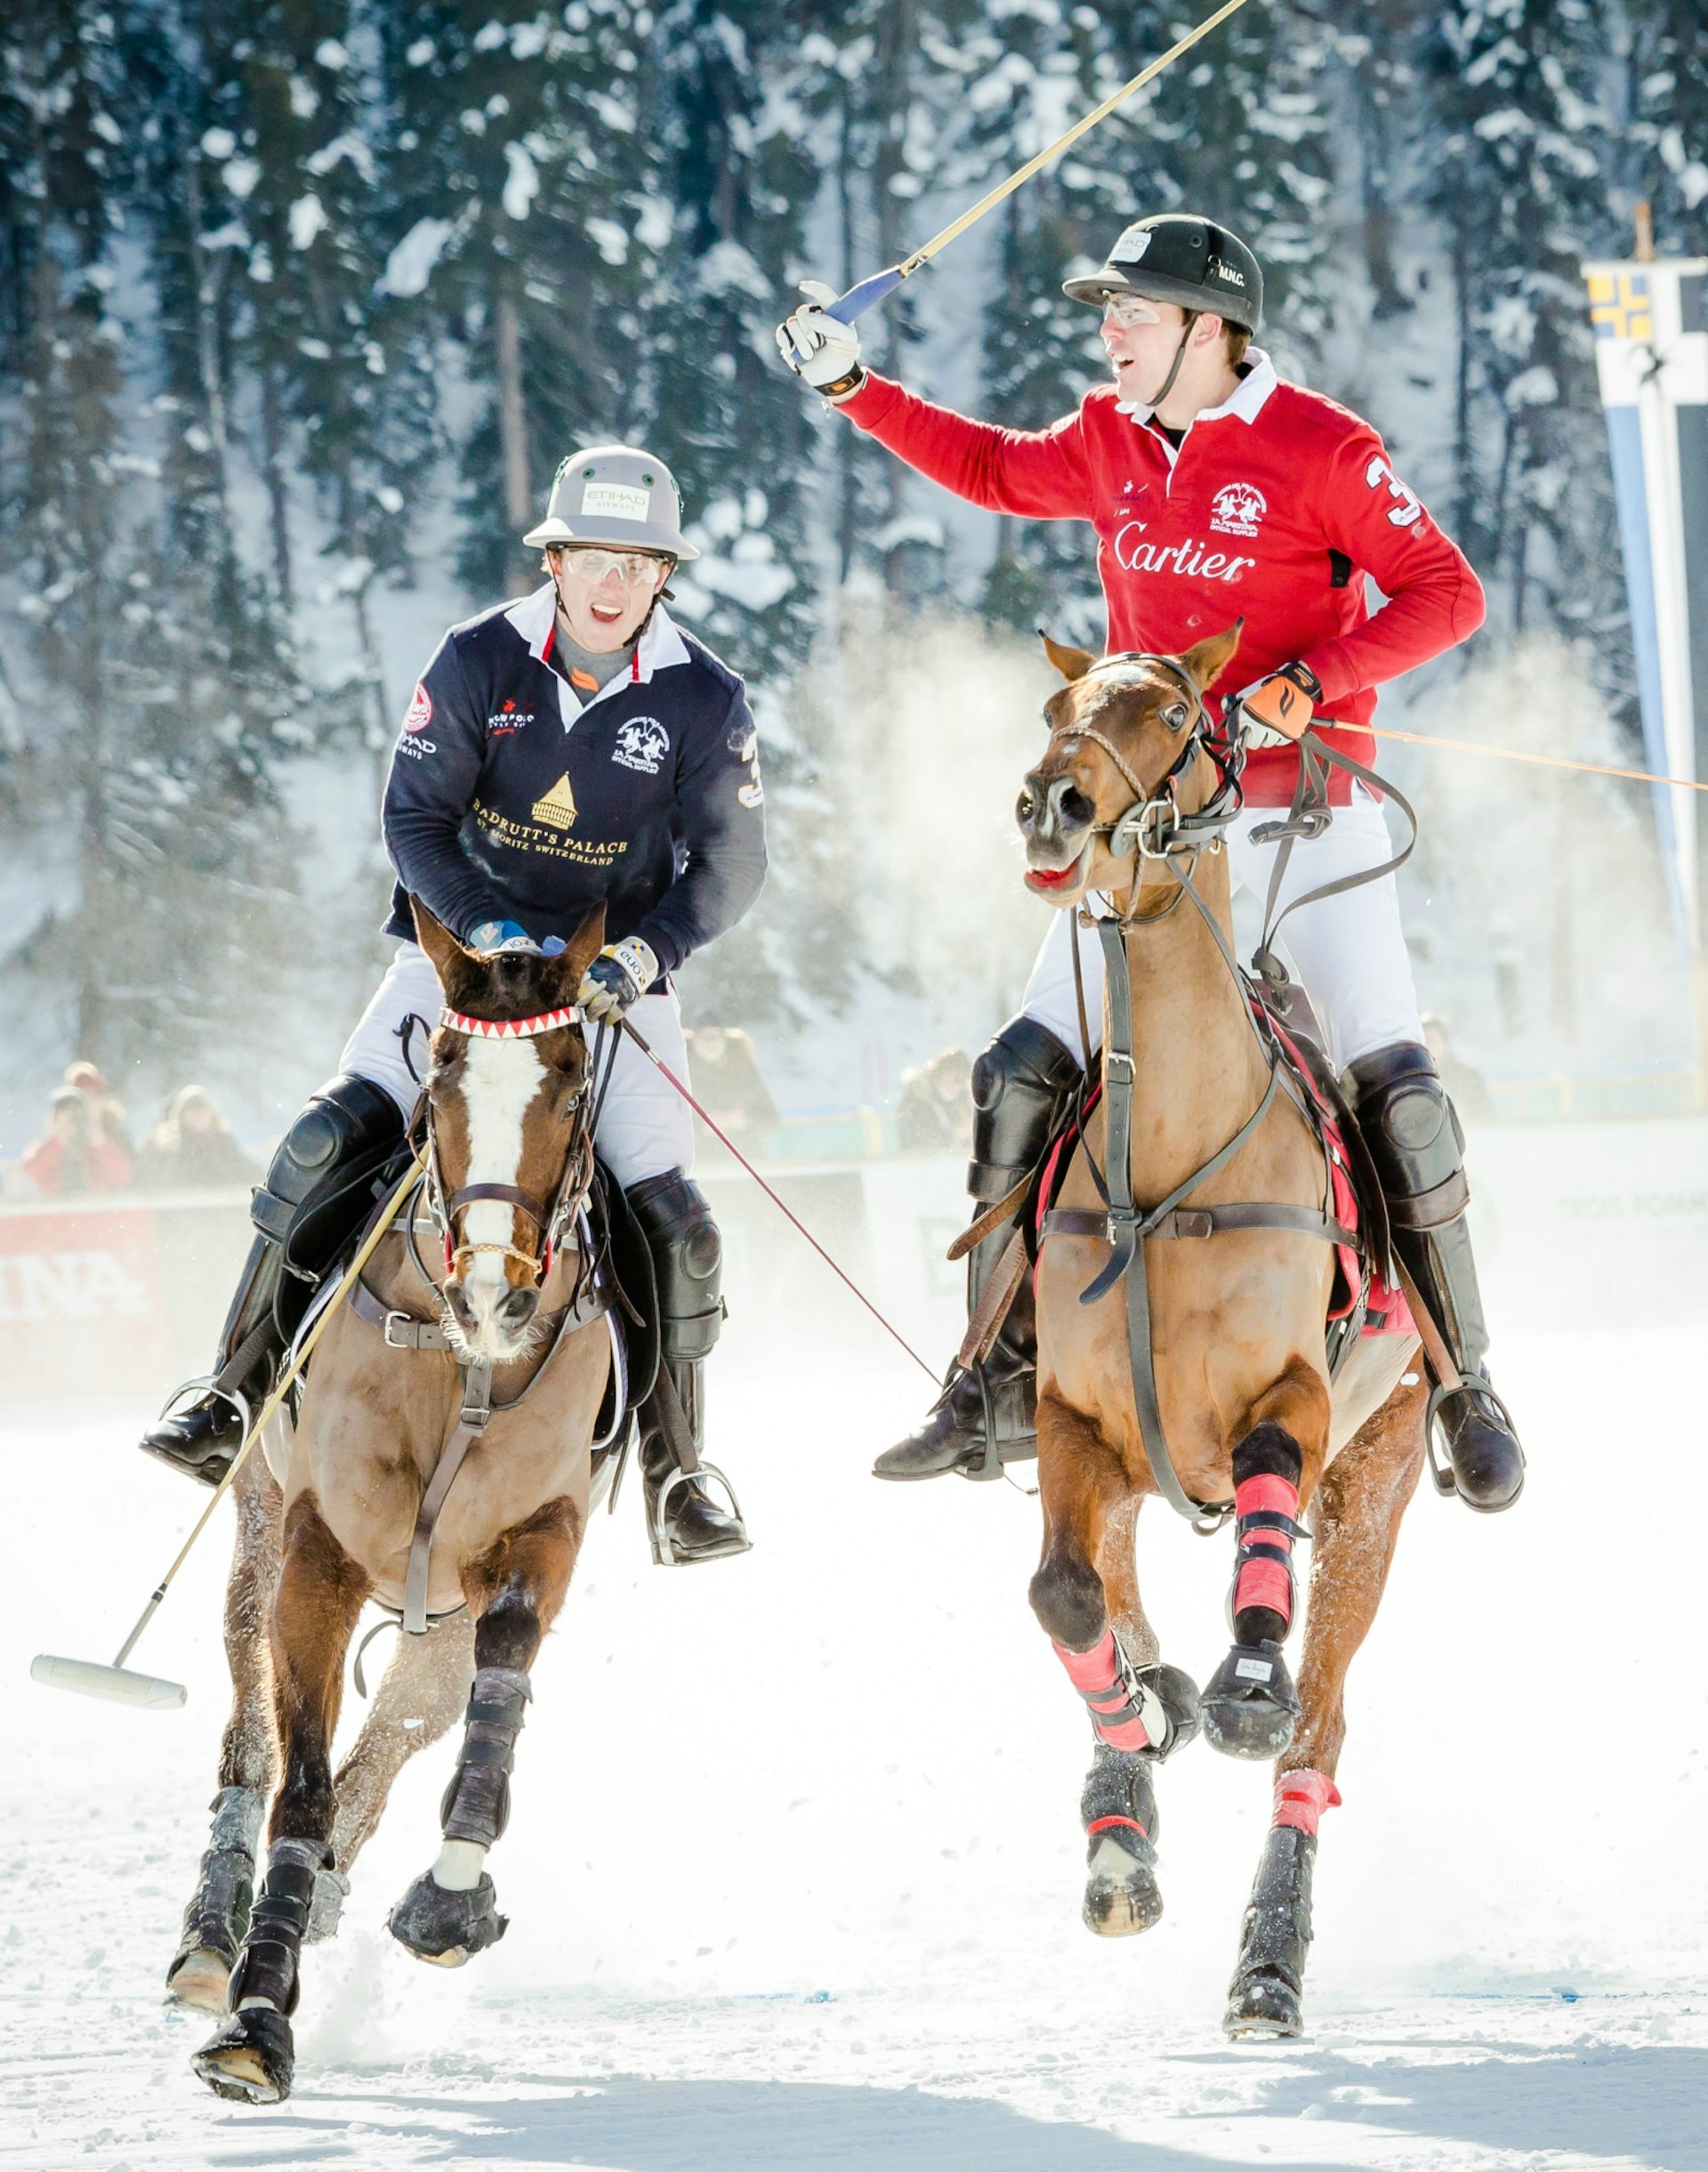 Unidentified players compete at the Snow Polo World Cup St Moritz in 2015